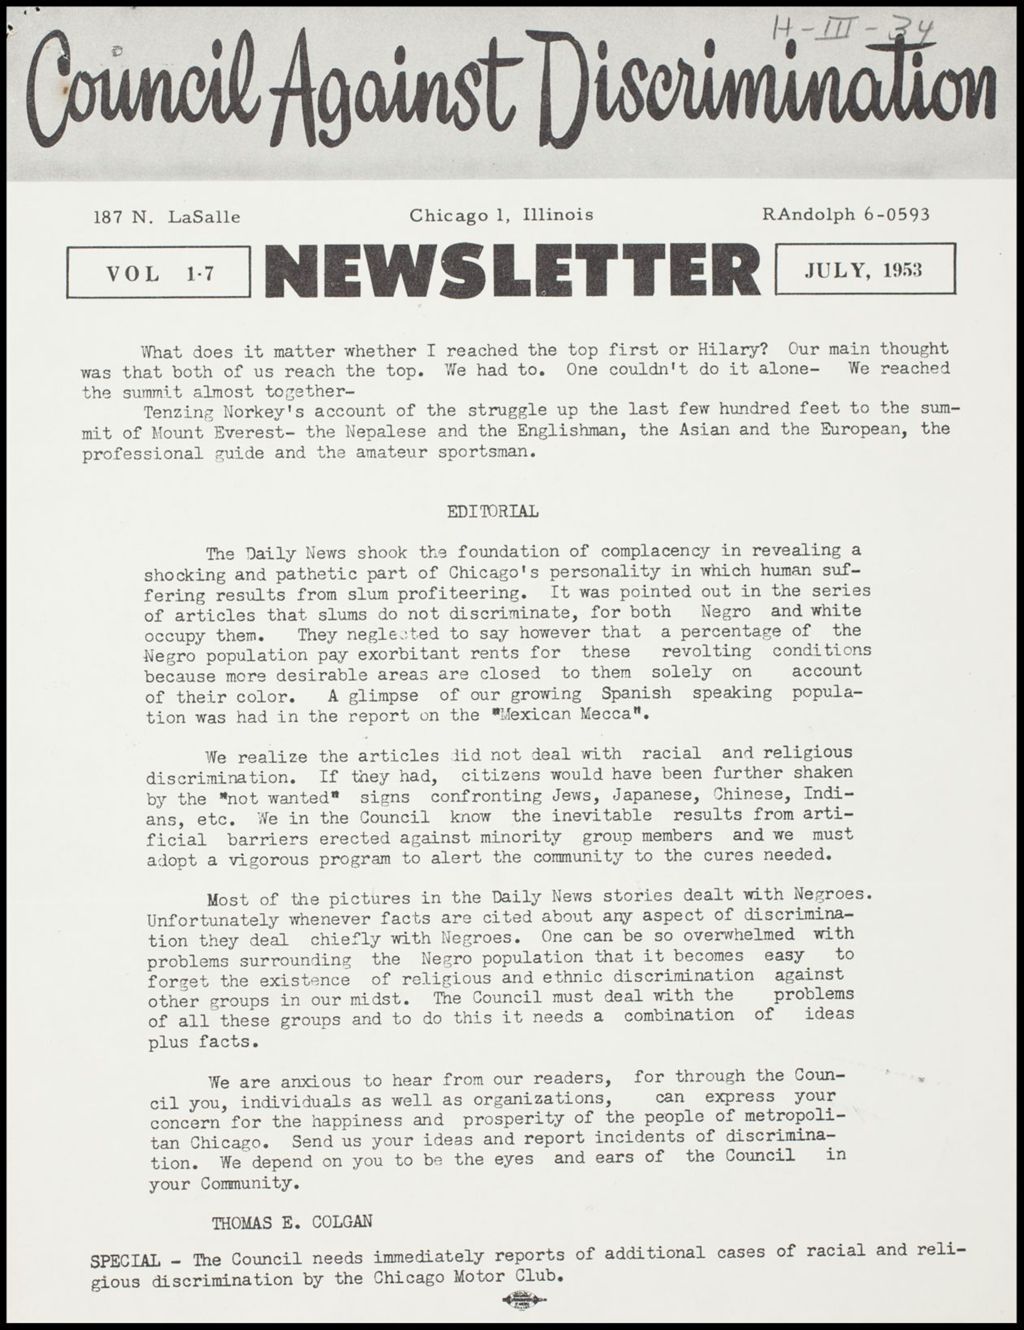 Miniature of Chicago Council Against Racial and Religious Discrimination newsletters and publications, 1953 (Folder I-2640)